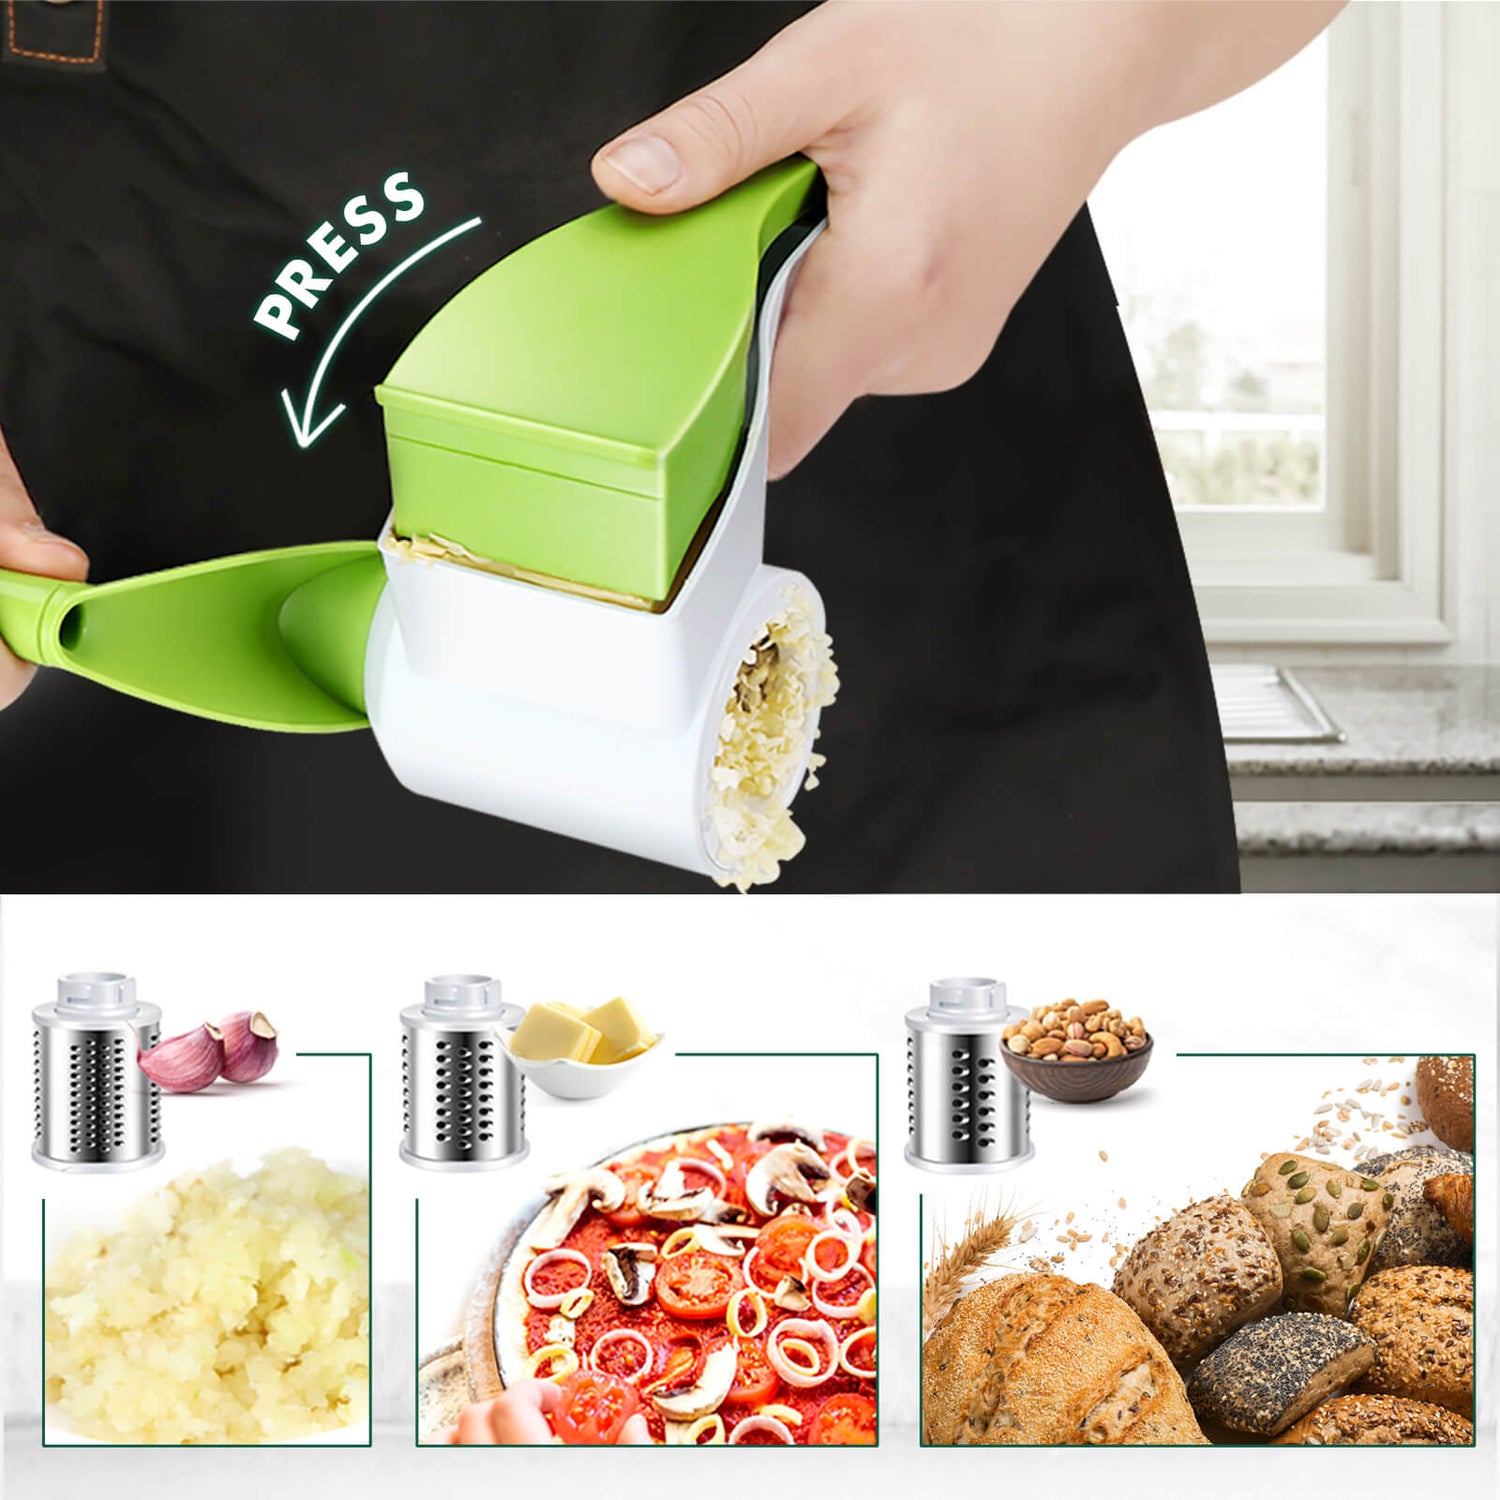 Manual Rotary Cheese Grater Online